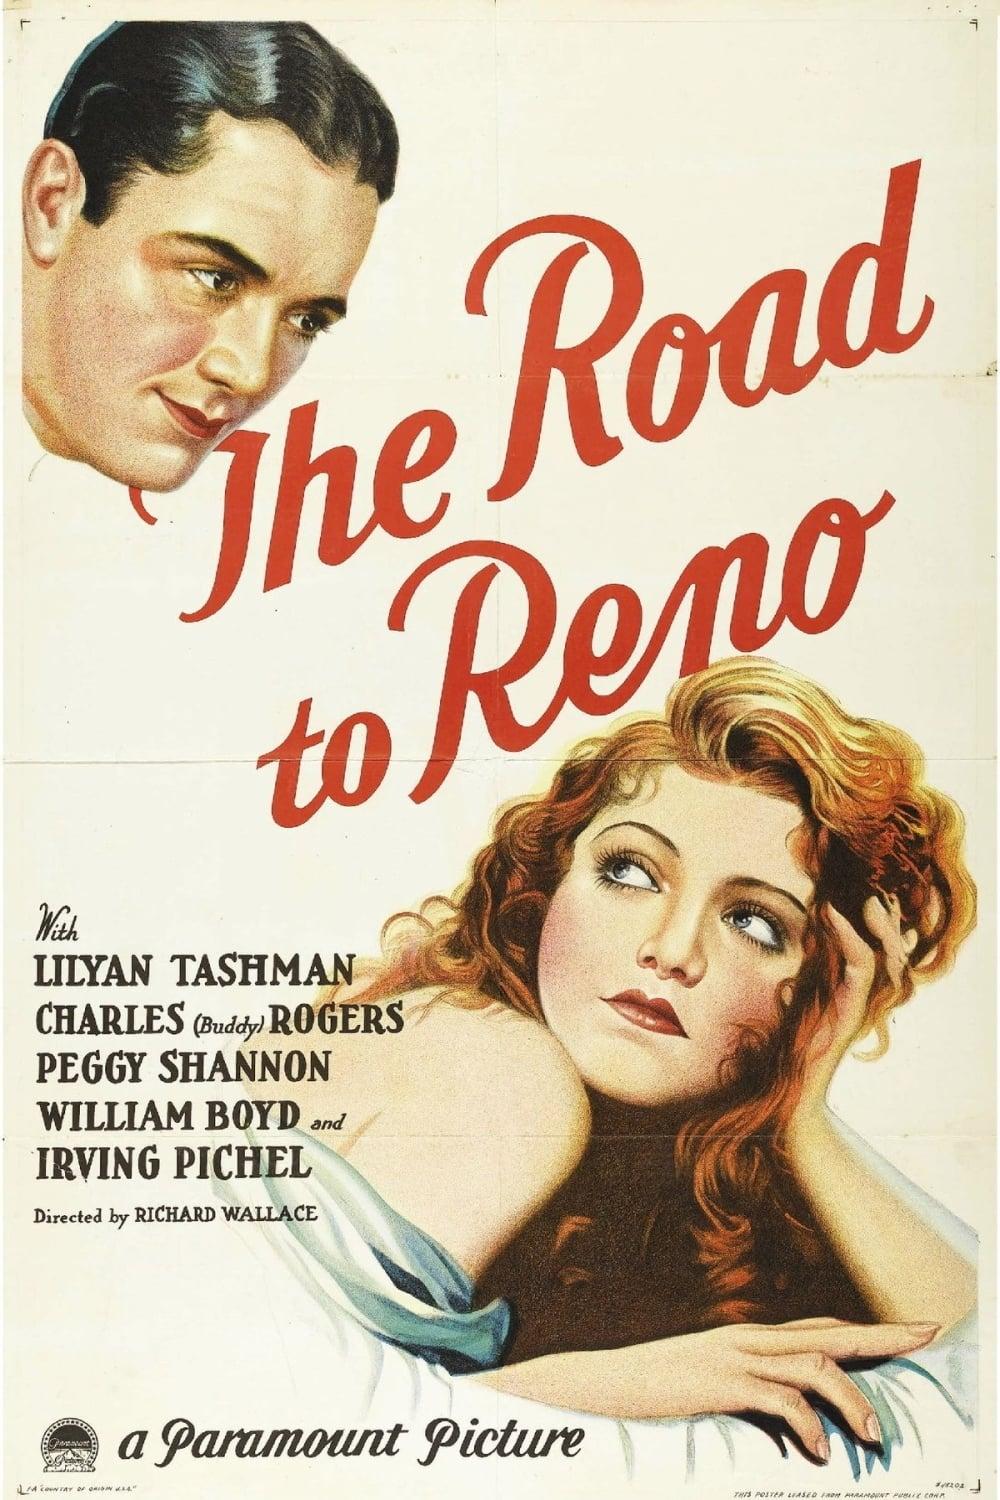 The Road to Reno poster